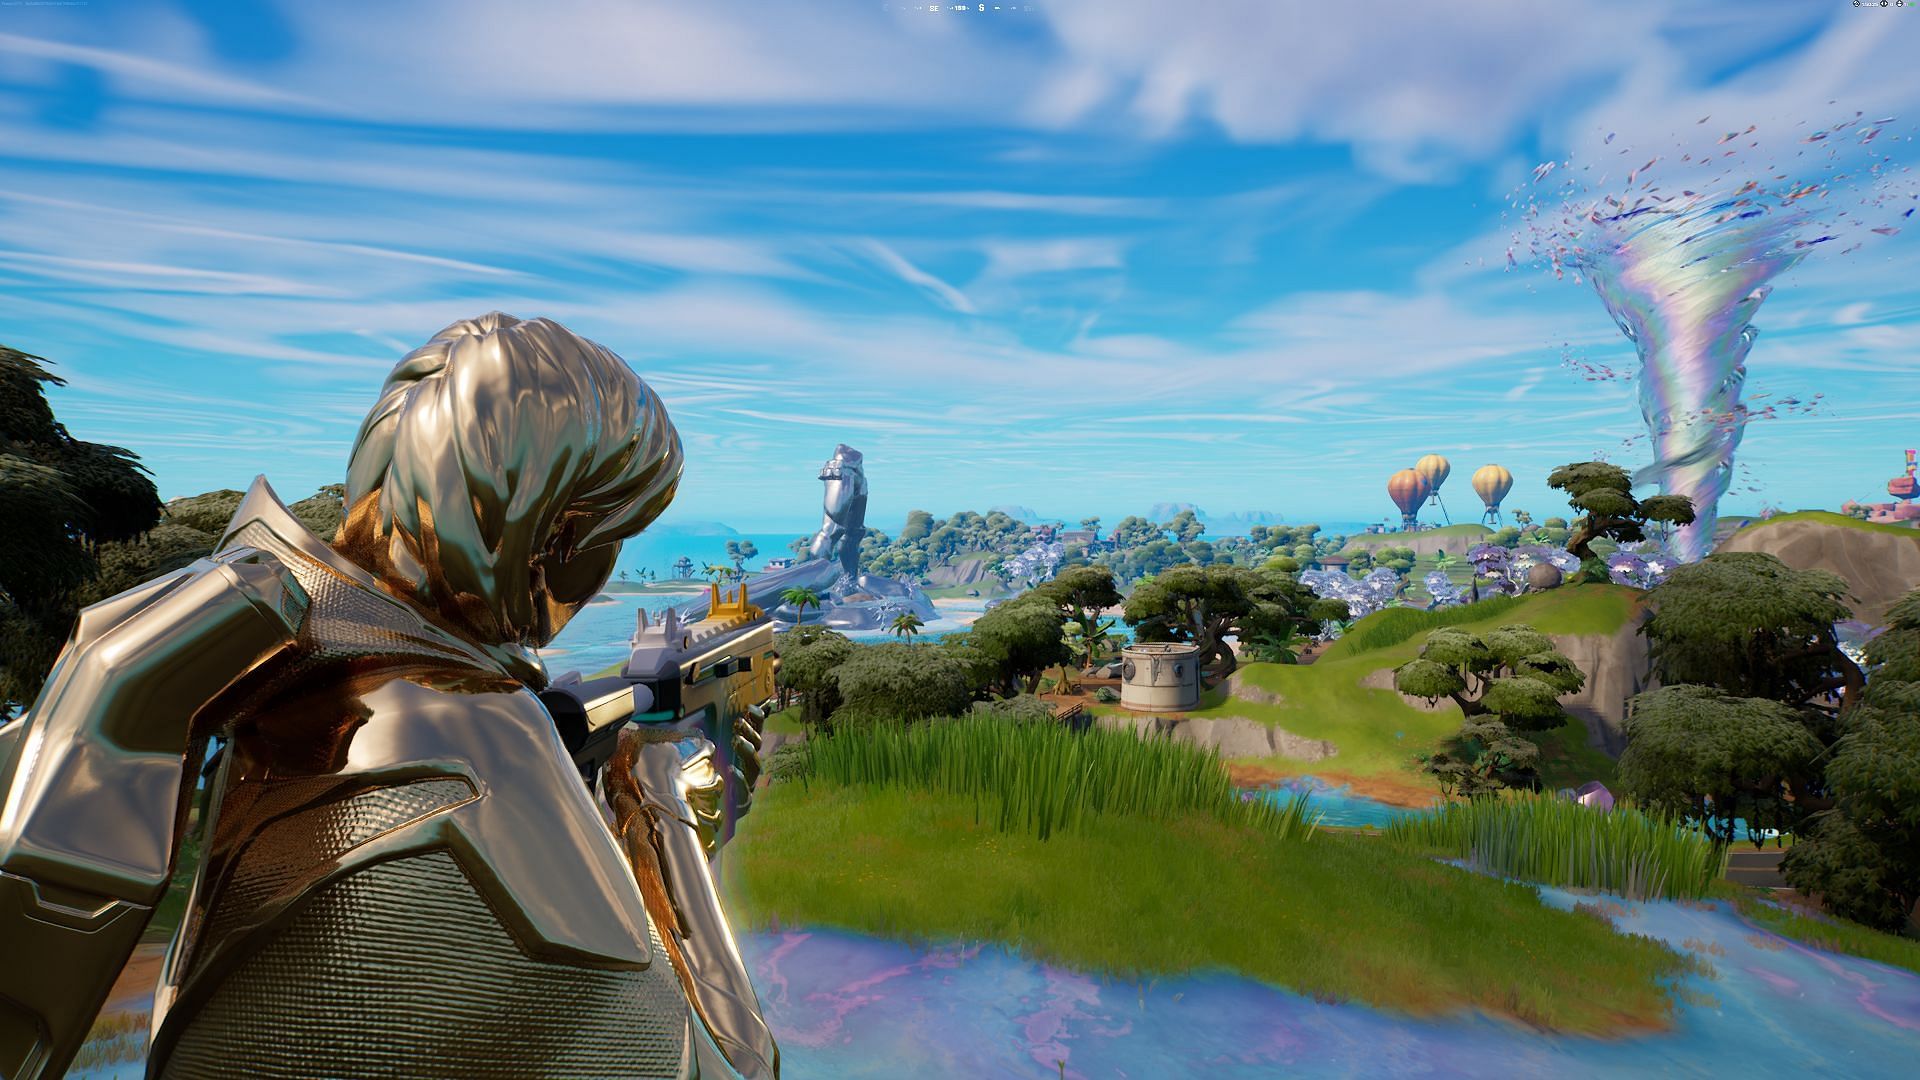 Chrome as far as the eye can see (Image via Epic Games/Fortnite)